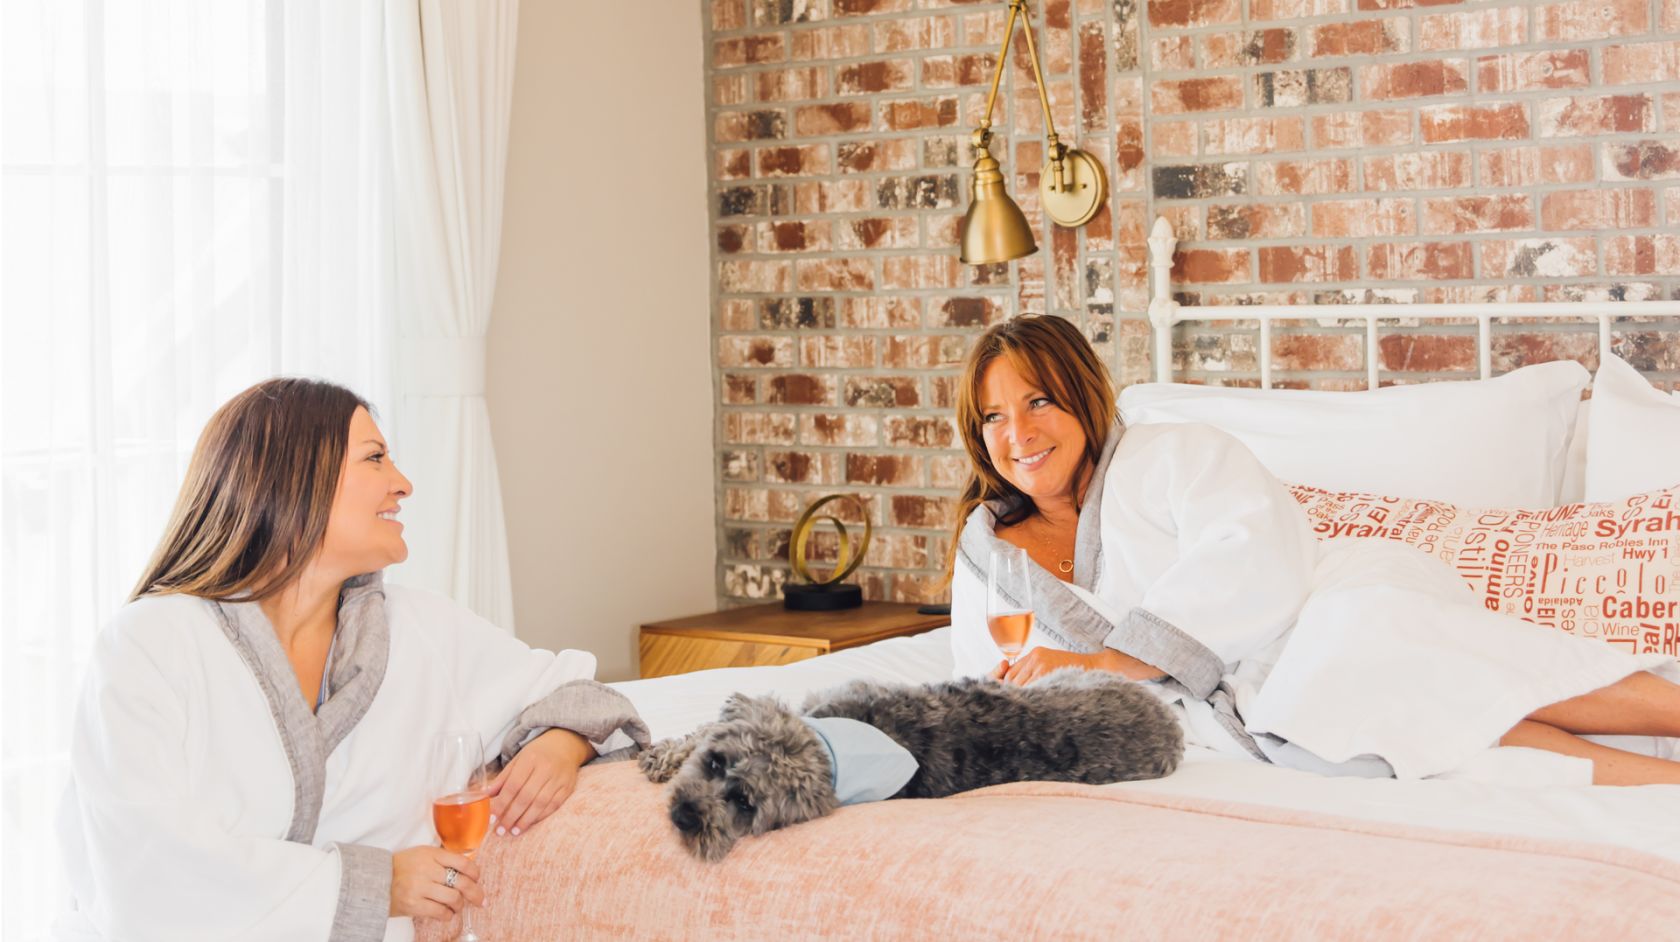 A Couple Of Women Sitting On A Bed With A Cat And A Glass Of Wine